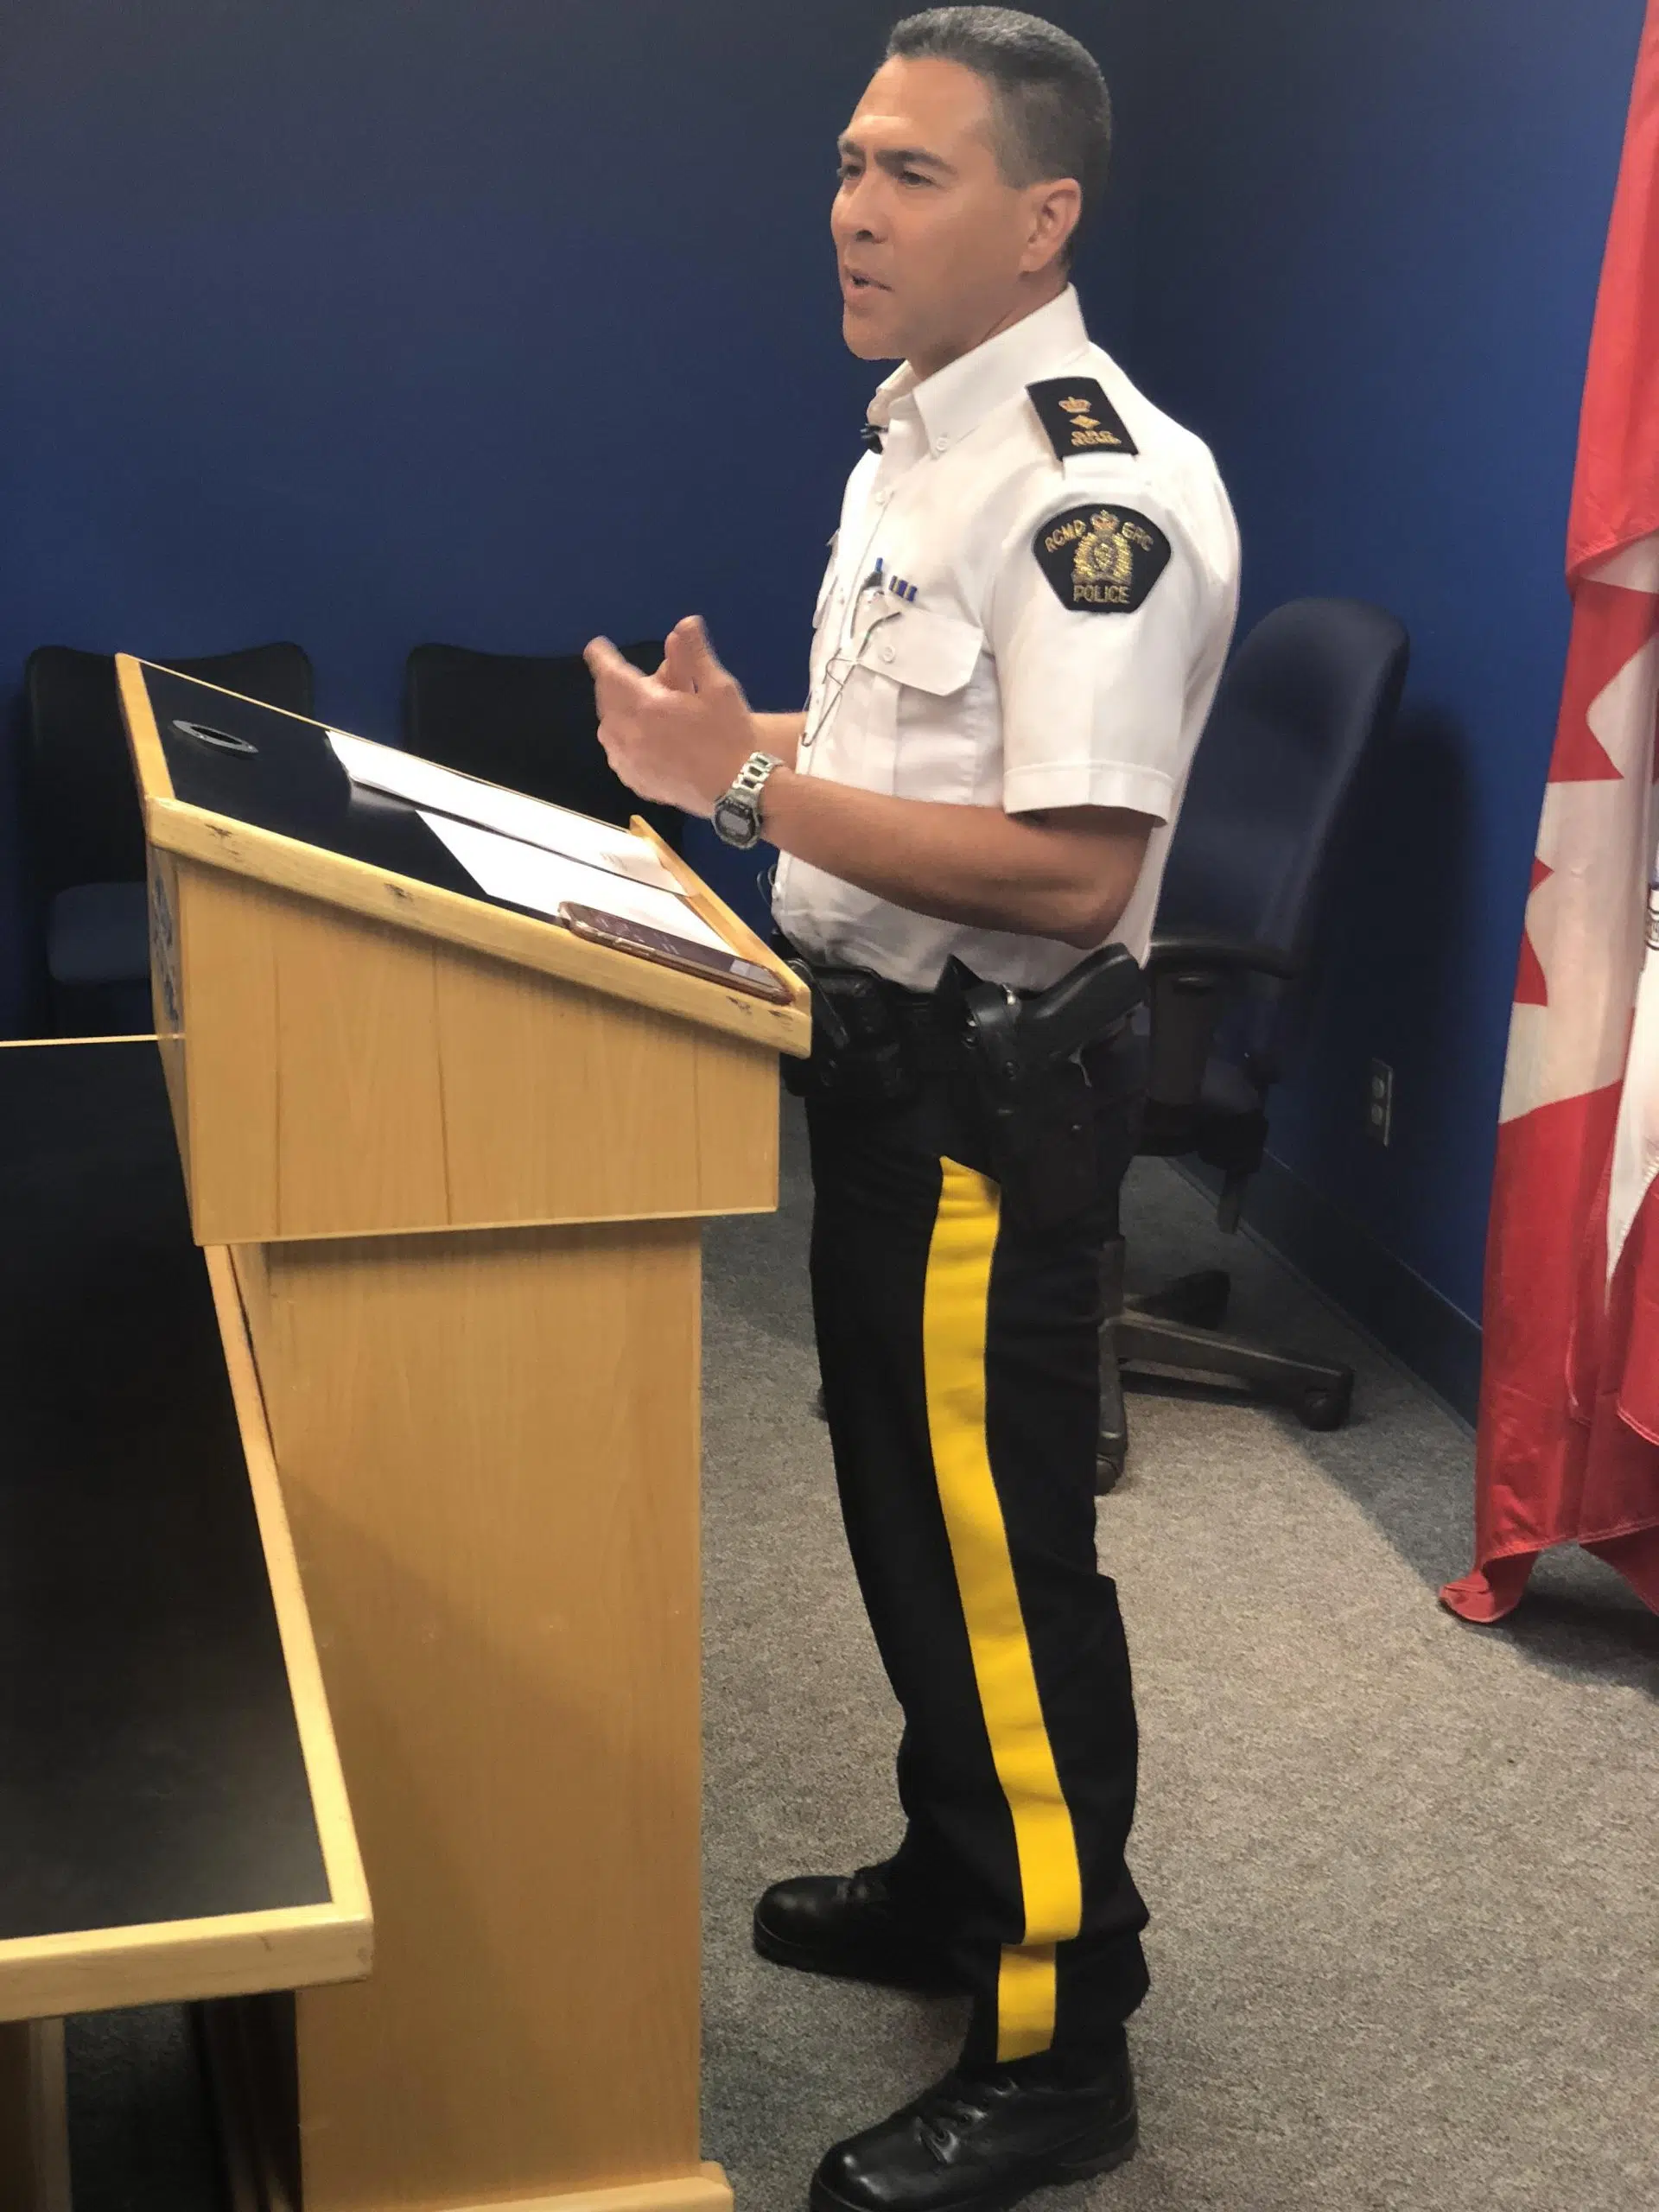 Kamloops RCMP Superintendent says Maintaining Enough Officers on the Road is a Challenge